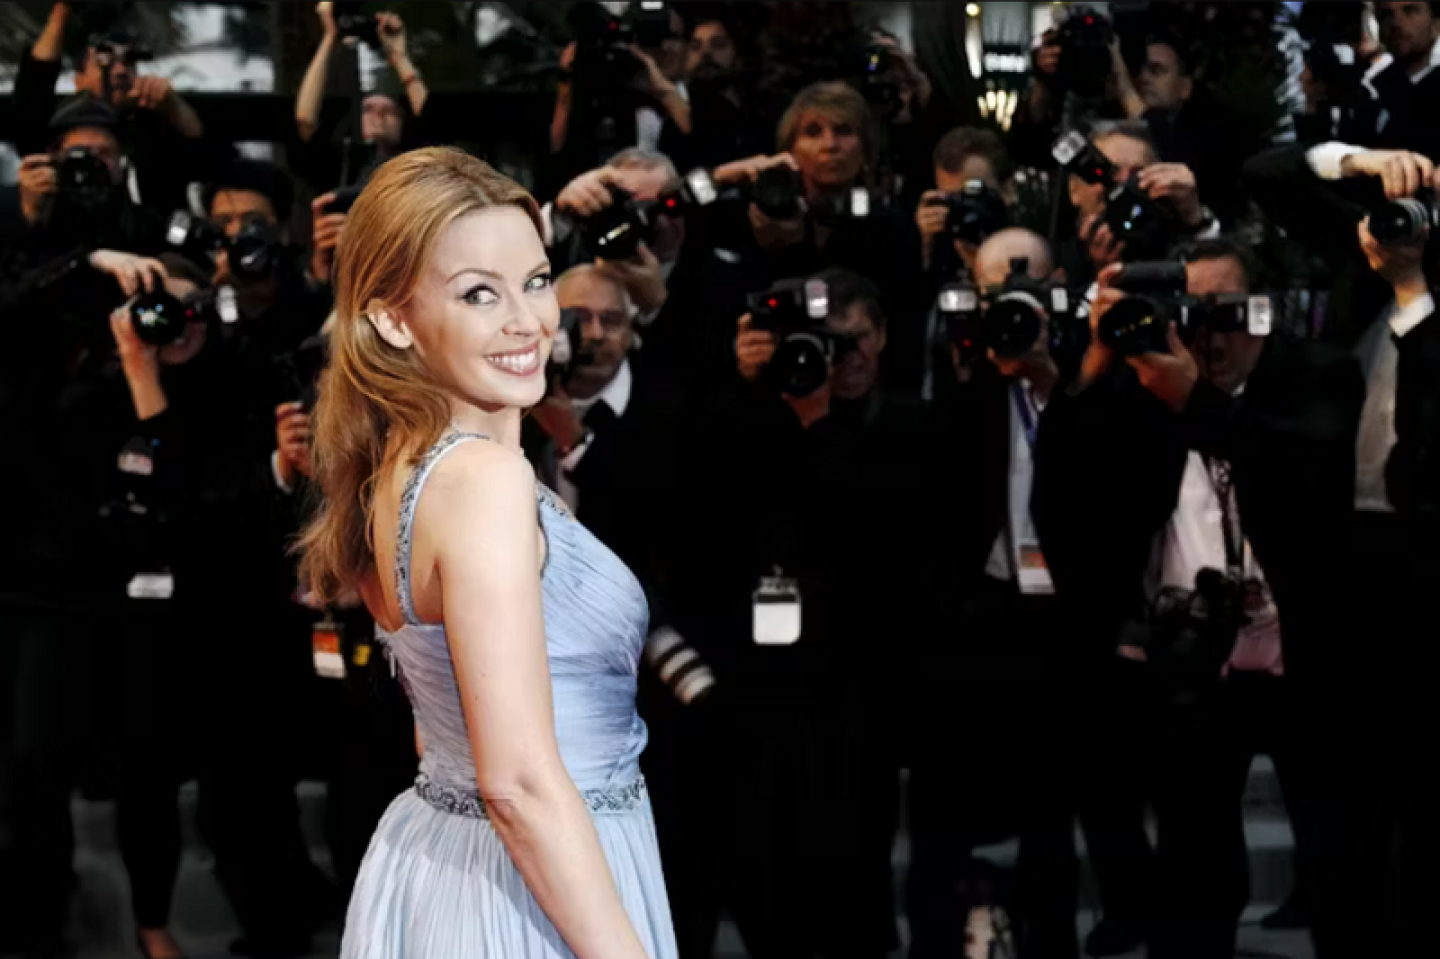 Kylie Minogue standing in front of photographers at a celebrity event.